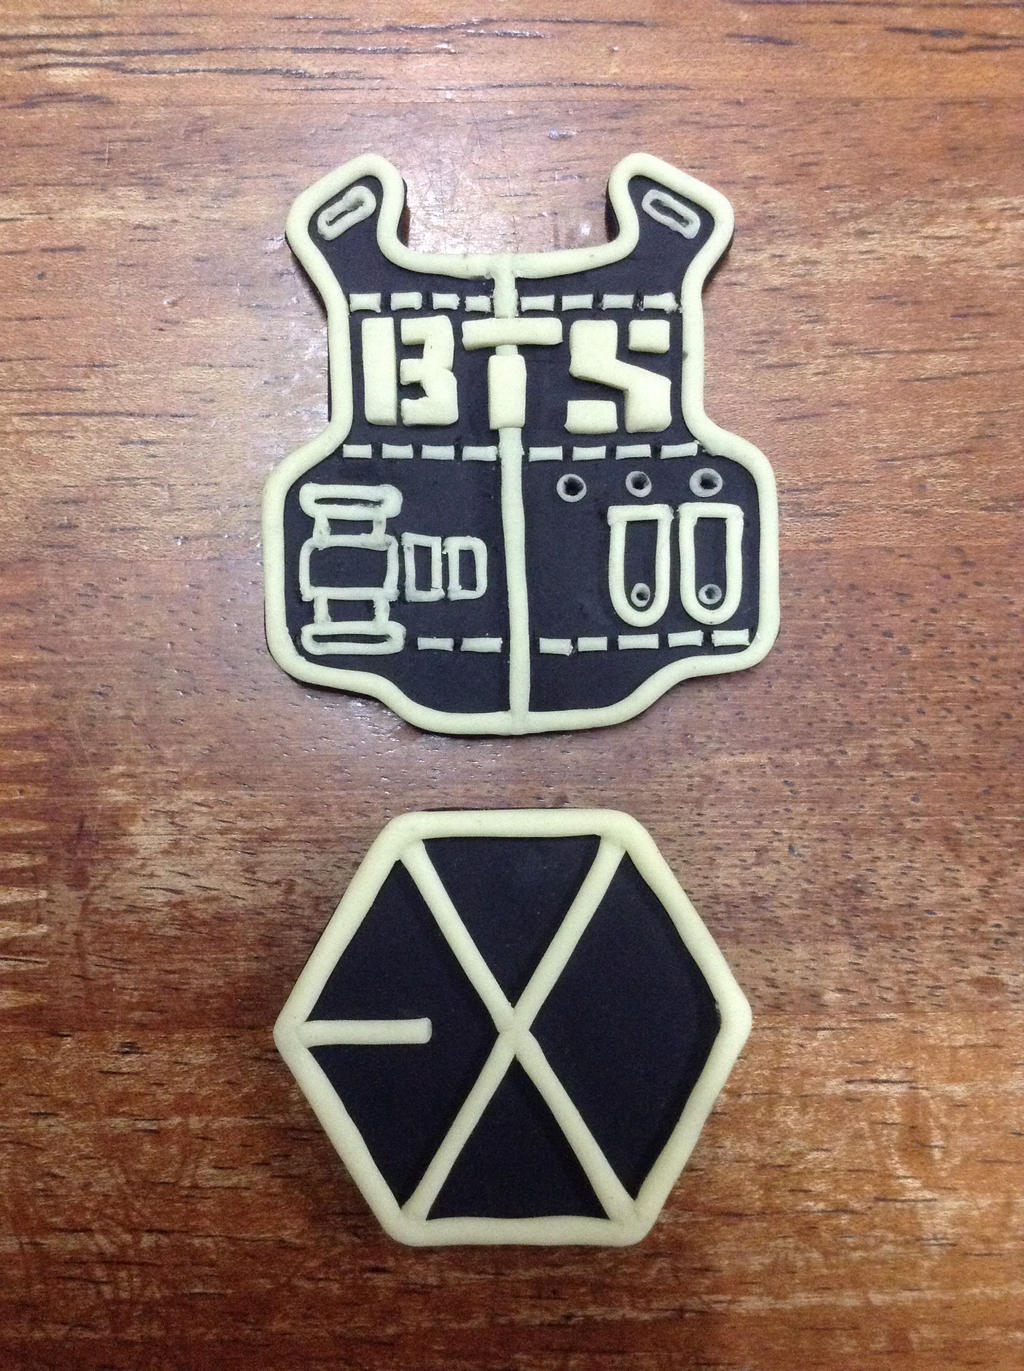 exo and bts badges